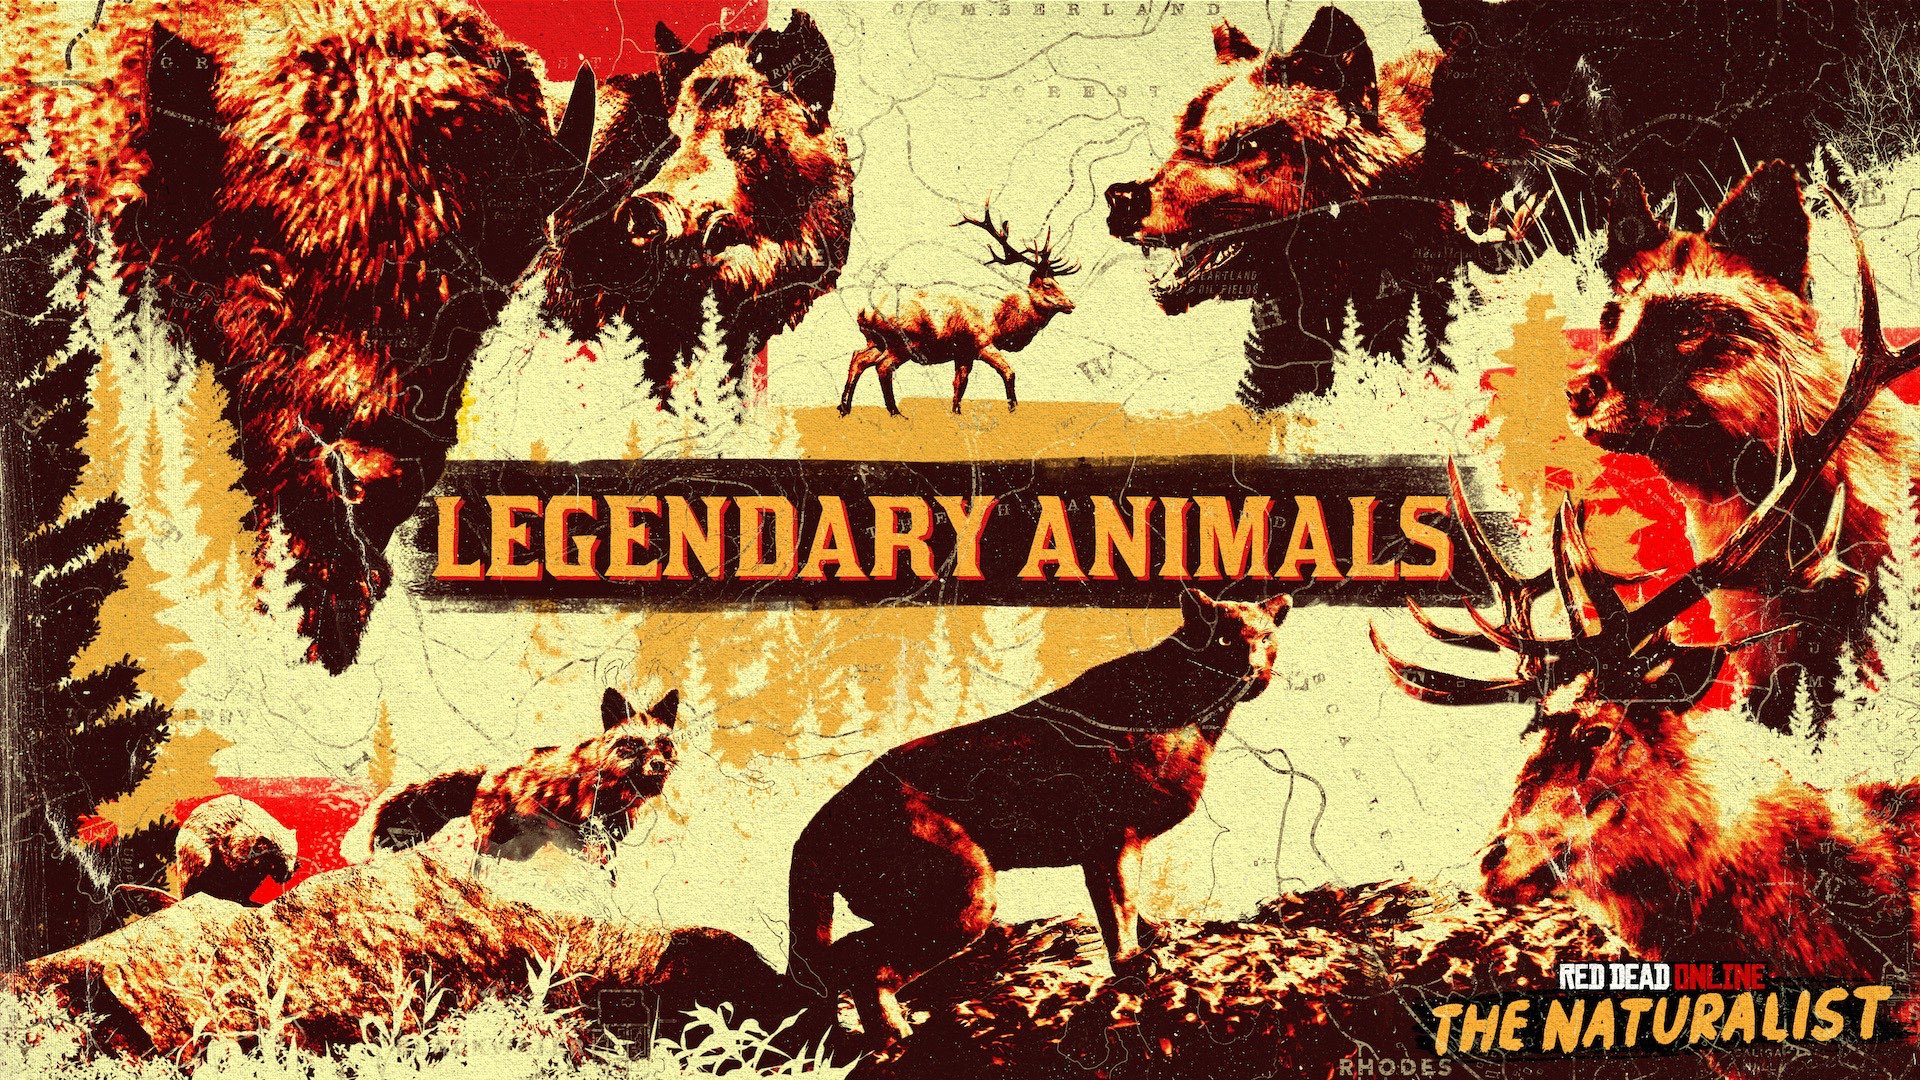 Red Dead Online Legendary Animals guide: How to find and sample Legendary  Animals | GamesRadar+